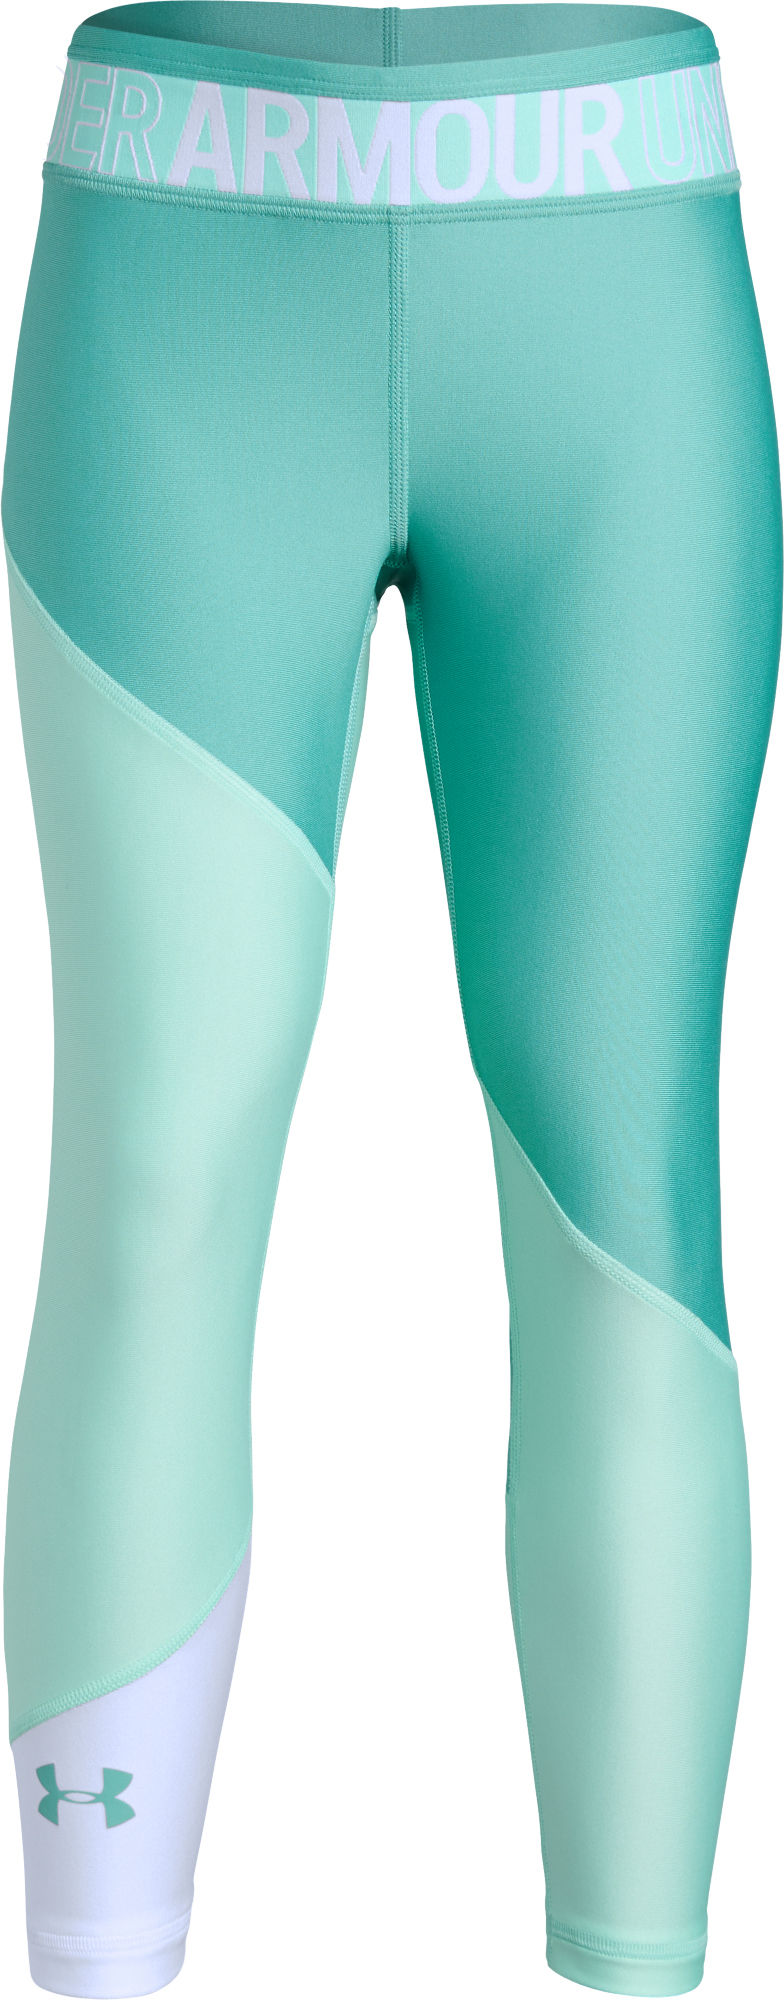 Under Armour HG Color Block Ankle Crop Legging Neo Turquoise XL